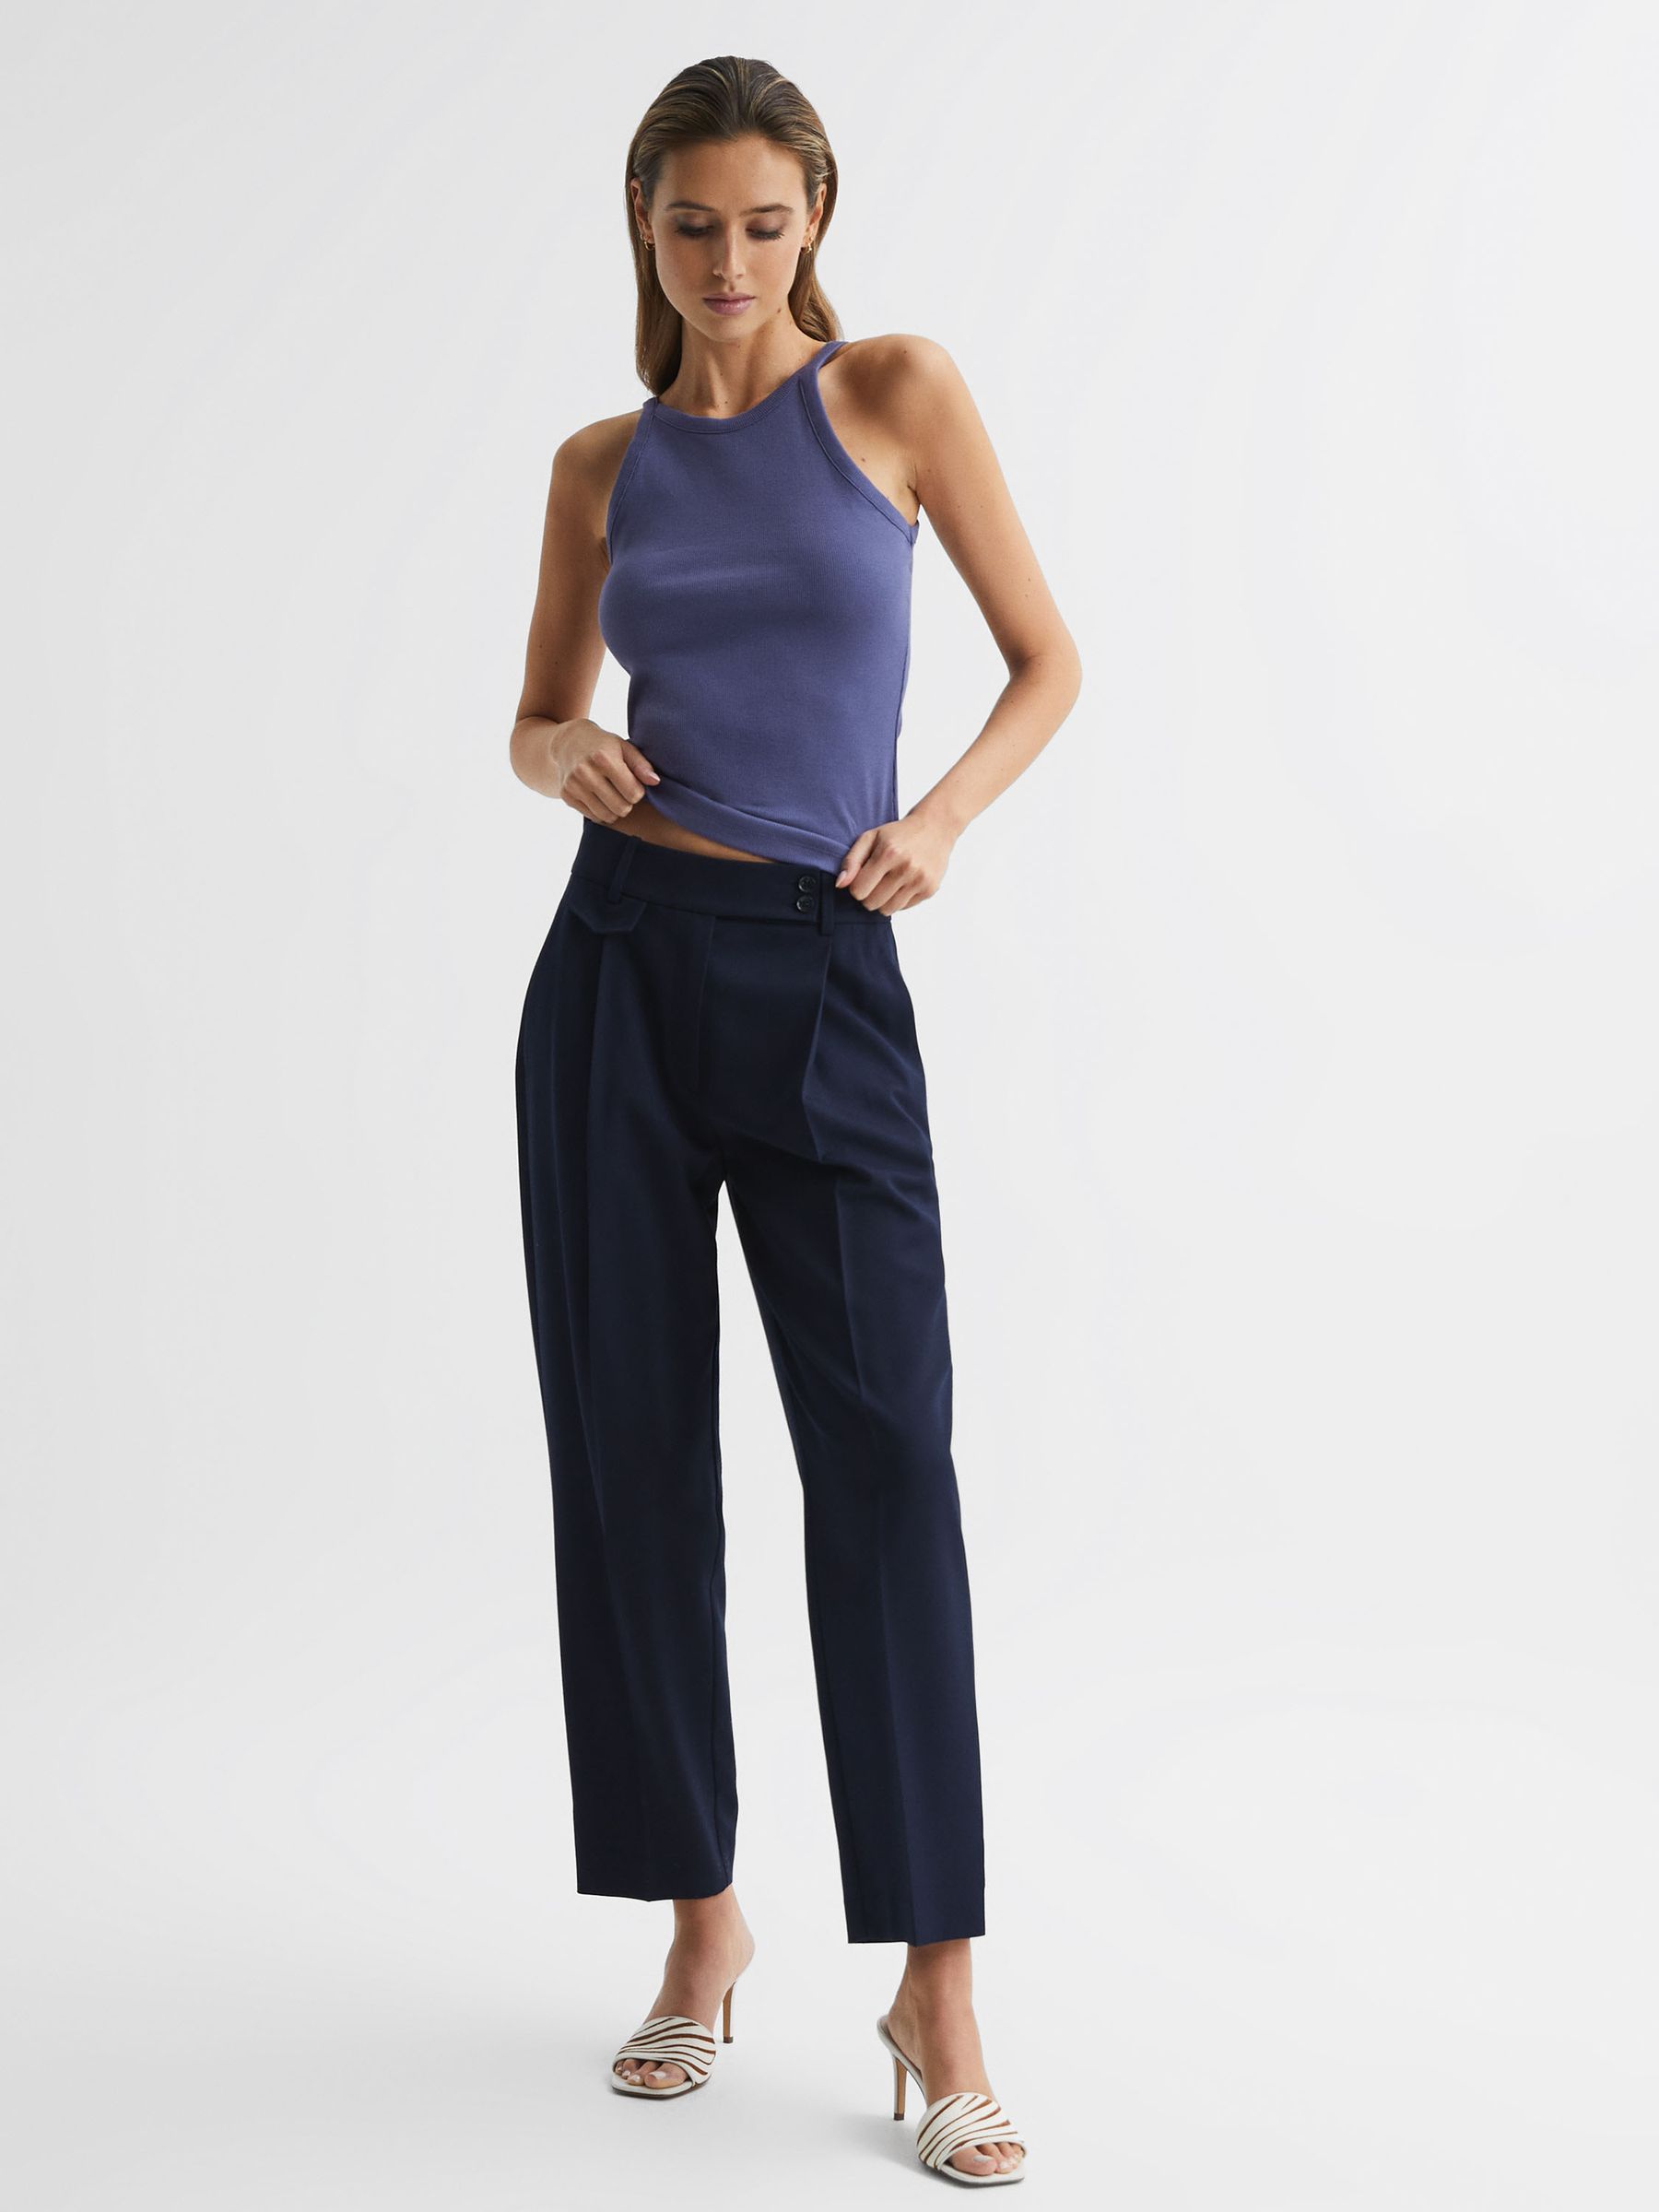 Crew Neck Ribbed Cami Vest Top in Dusty Blue - REISS